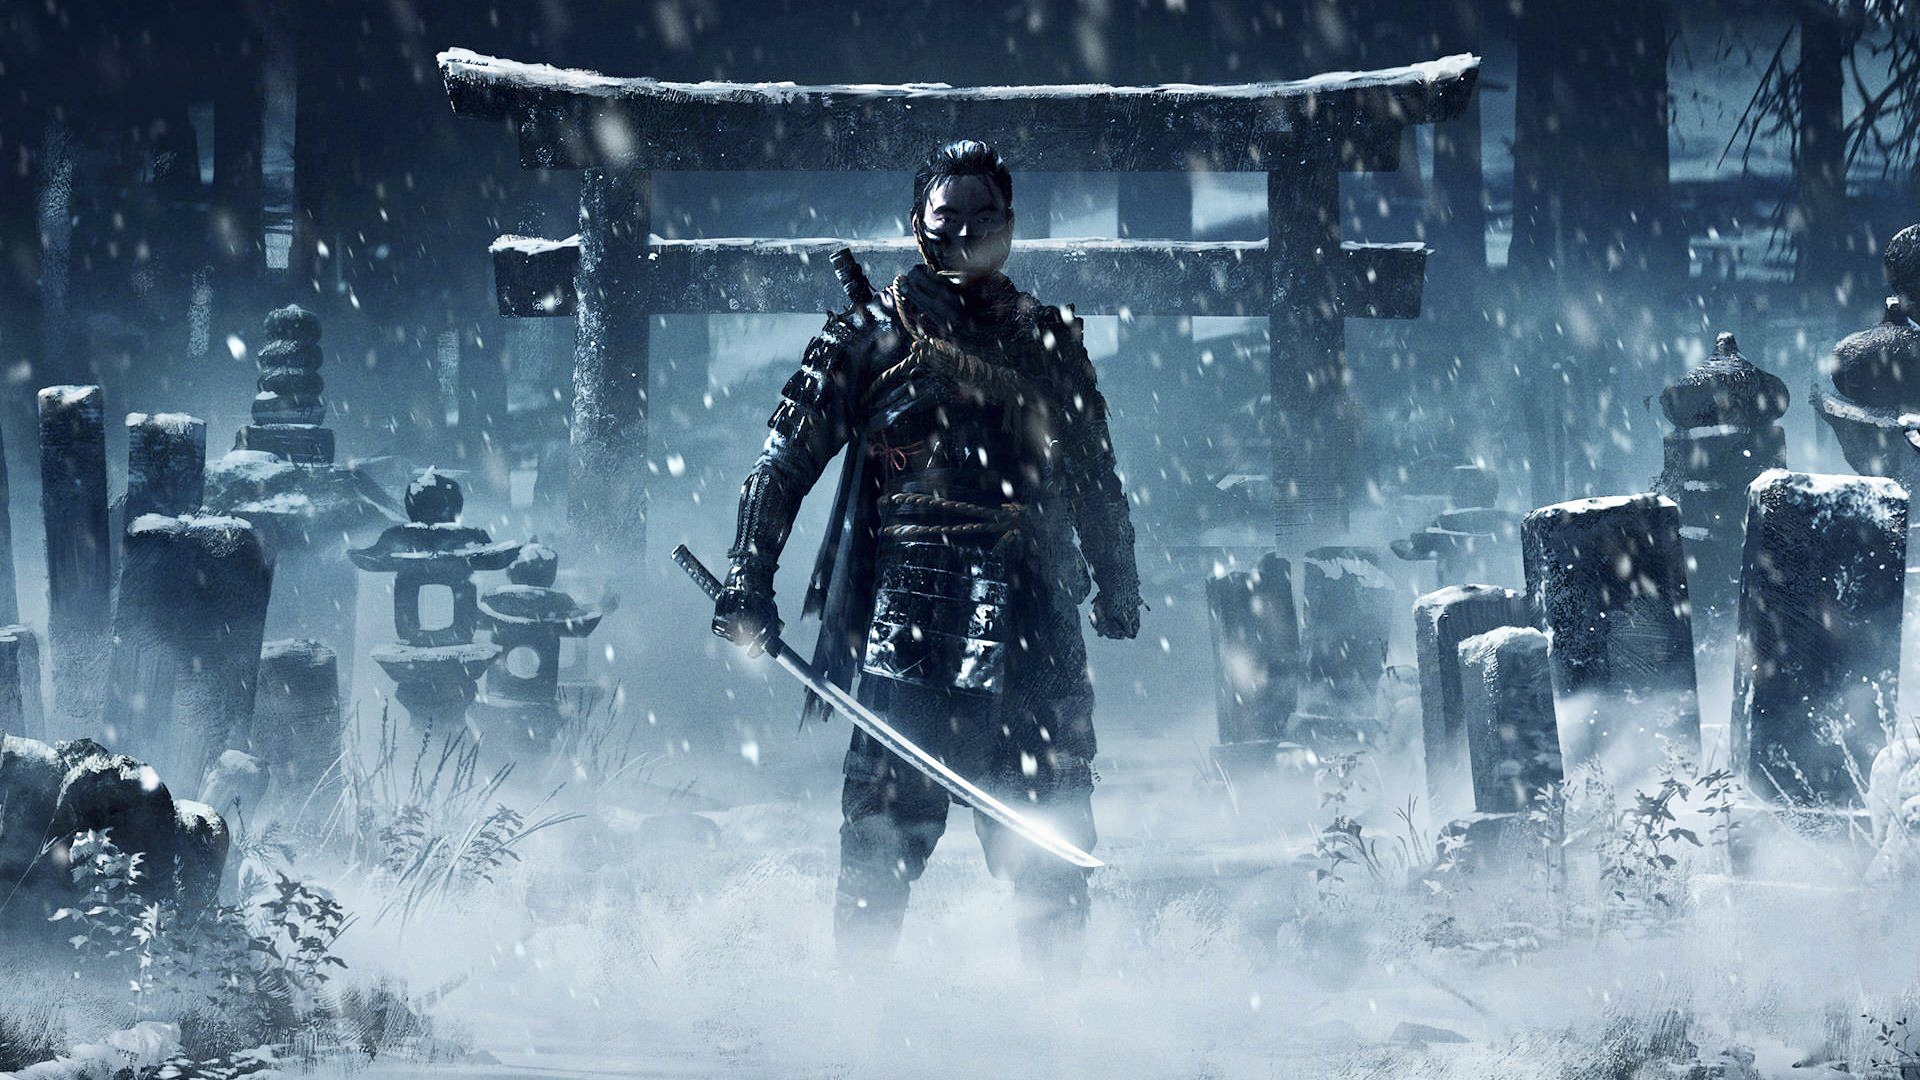 A Ghost of Tsushima film has been announced